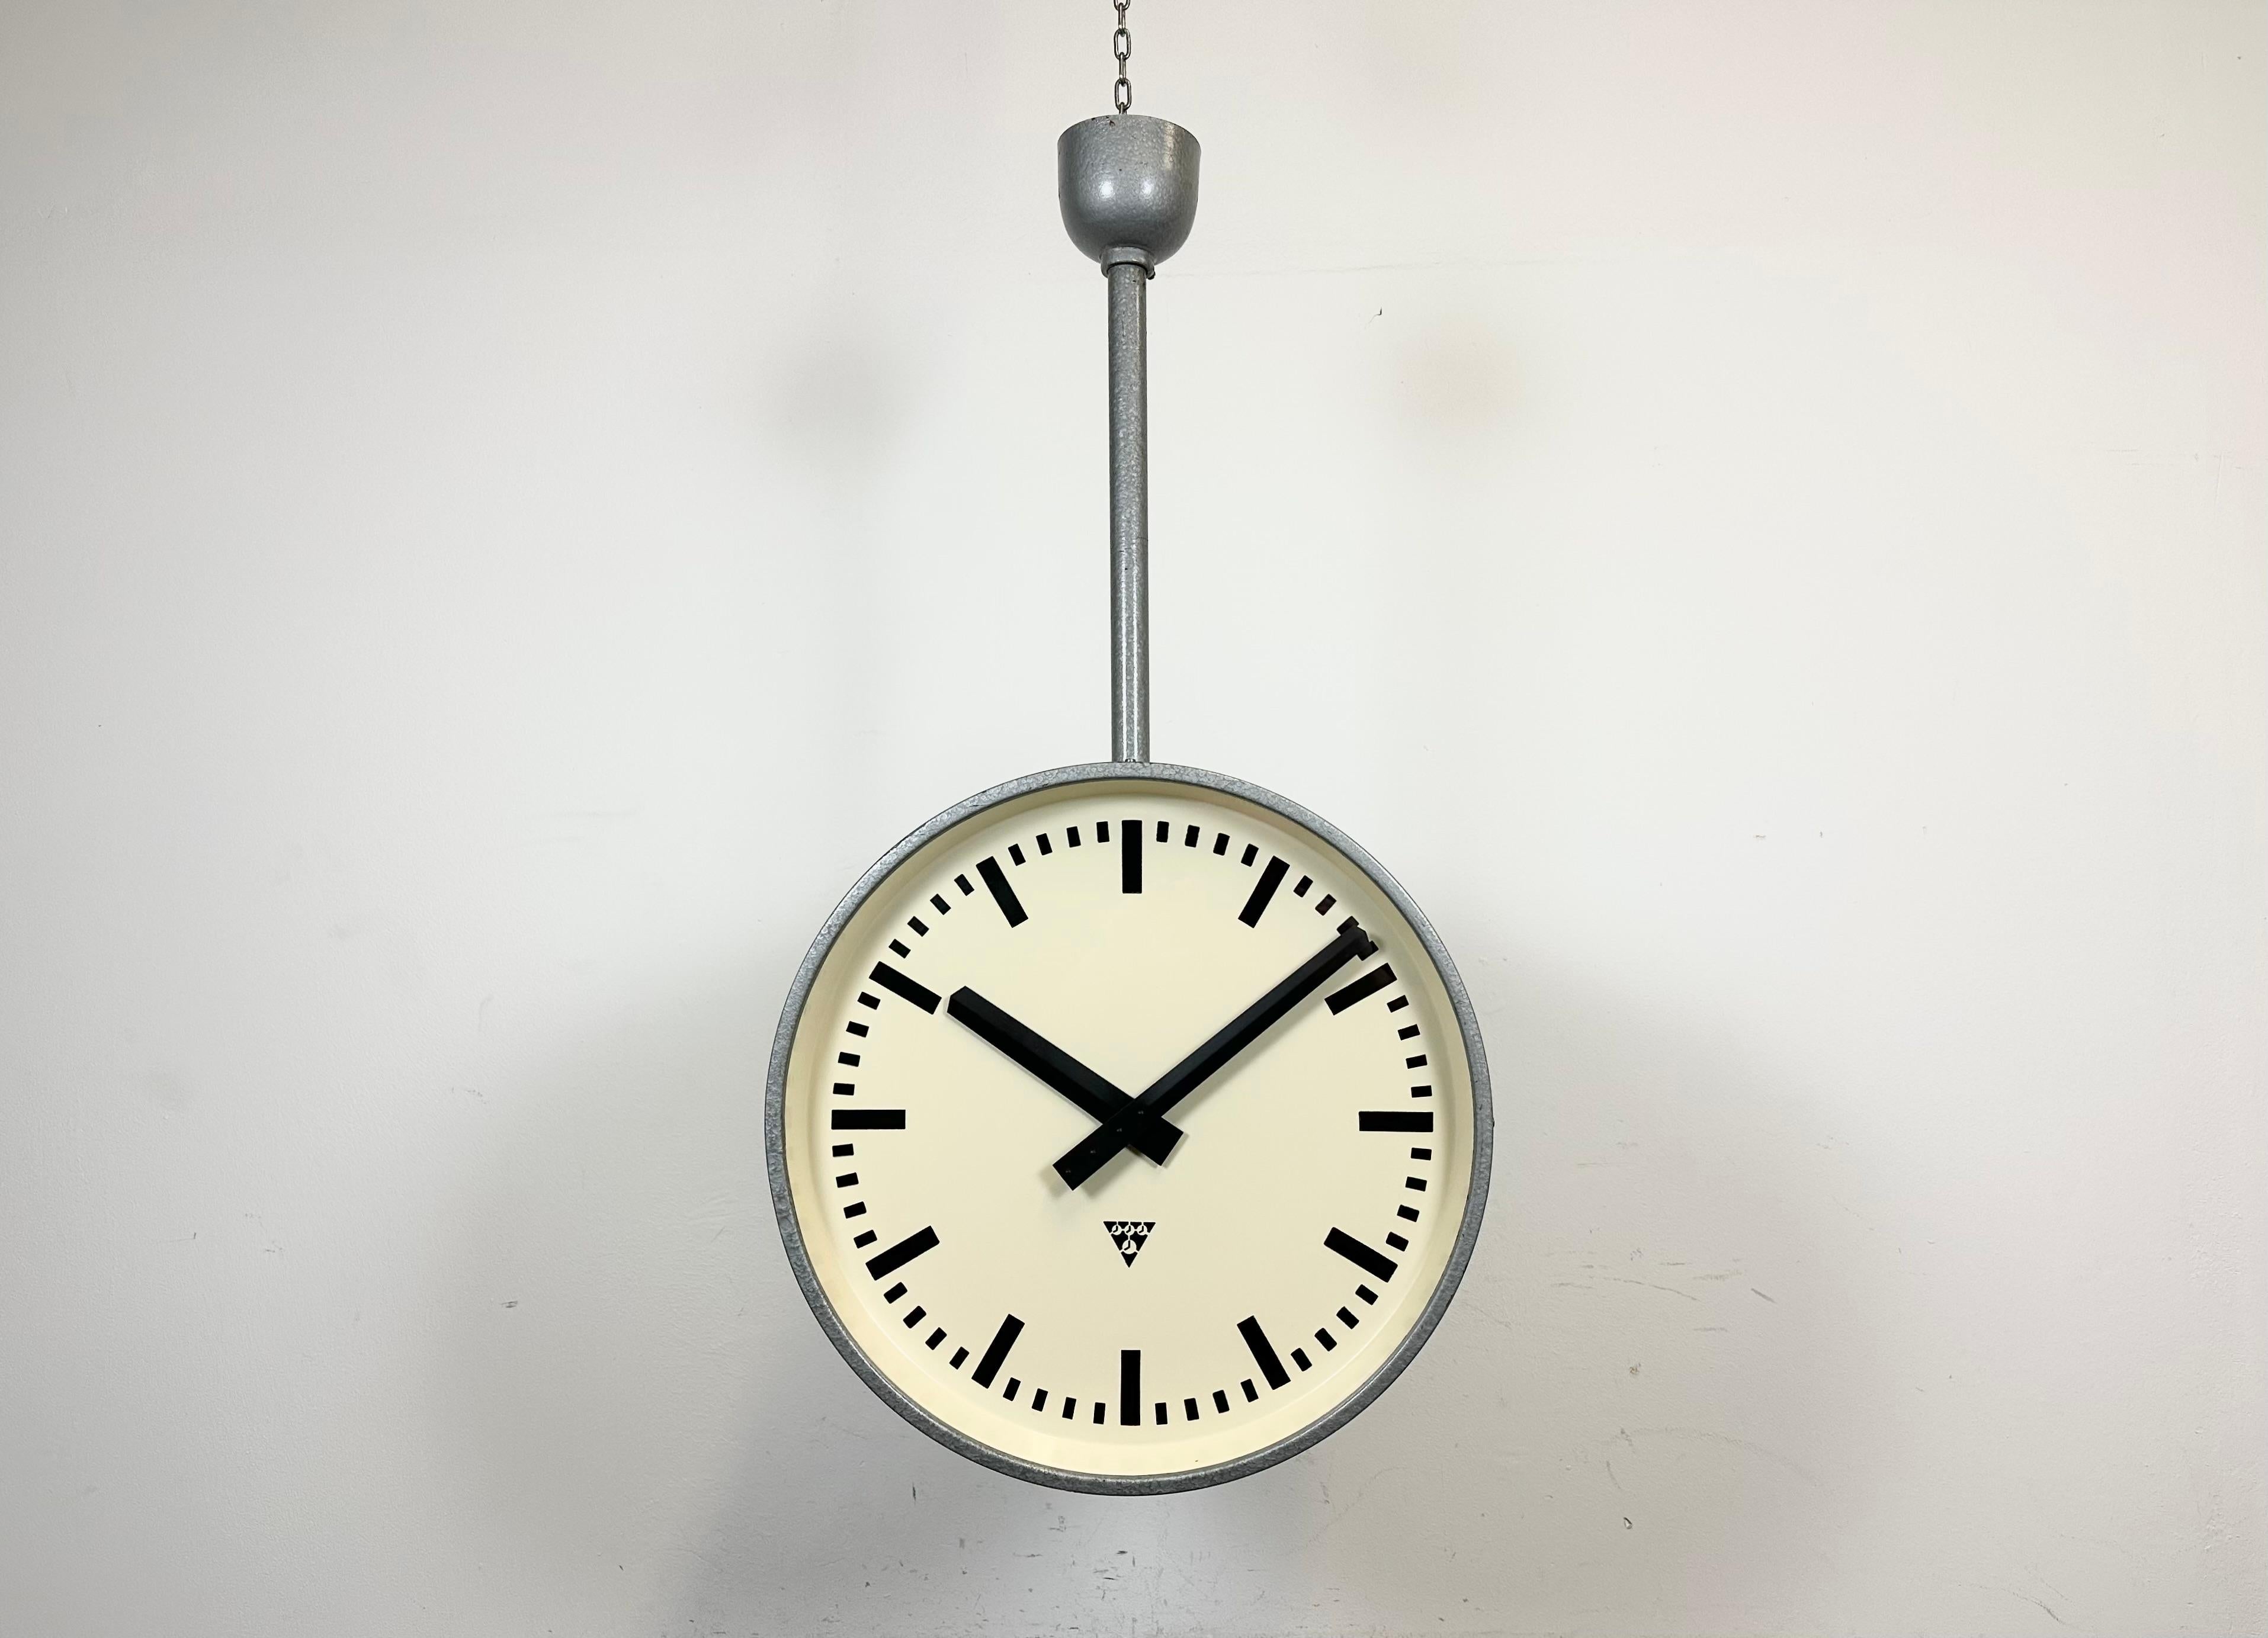 This large double sided railway or factory clock was produced by Pragotron, in former Czechoslovakia, during the 1960s. The piece features a grey Hammer paint metal body and a clear glass cover. The clock has been converted into a battery-powered